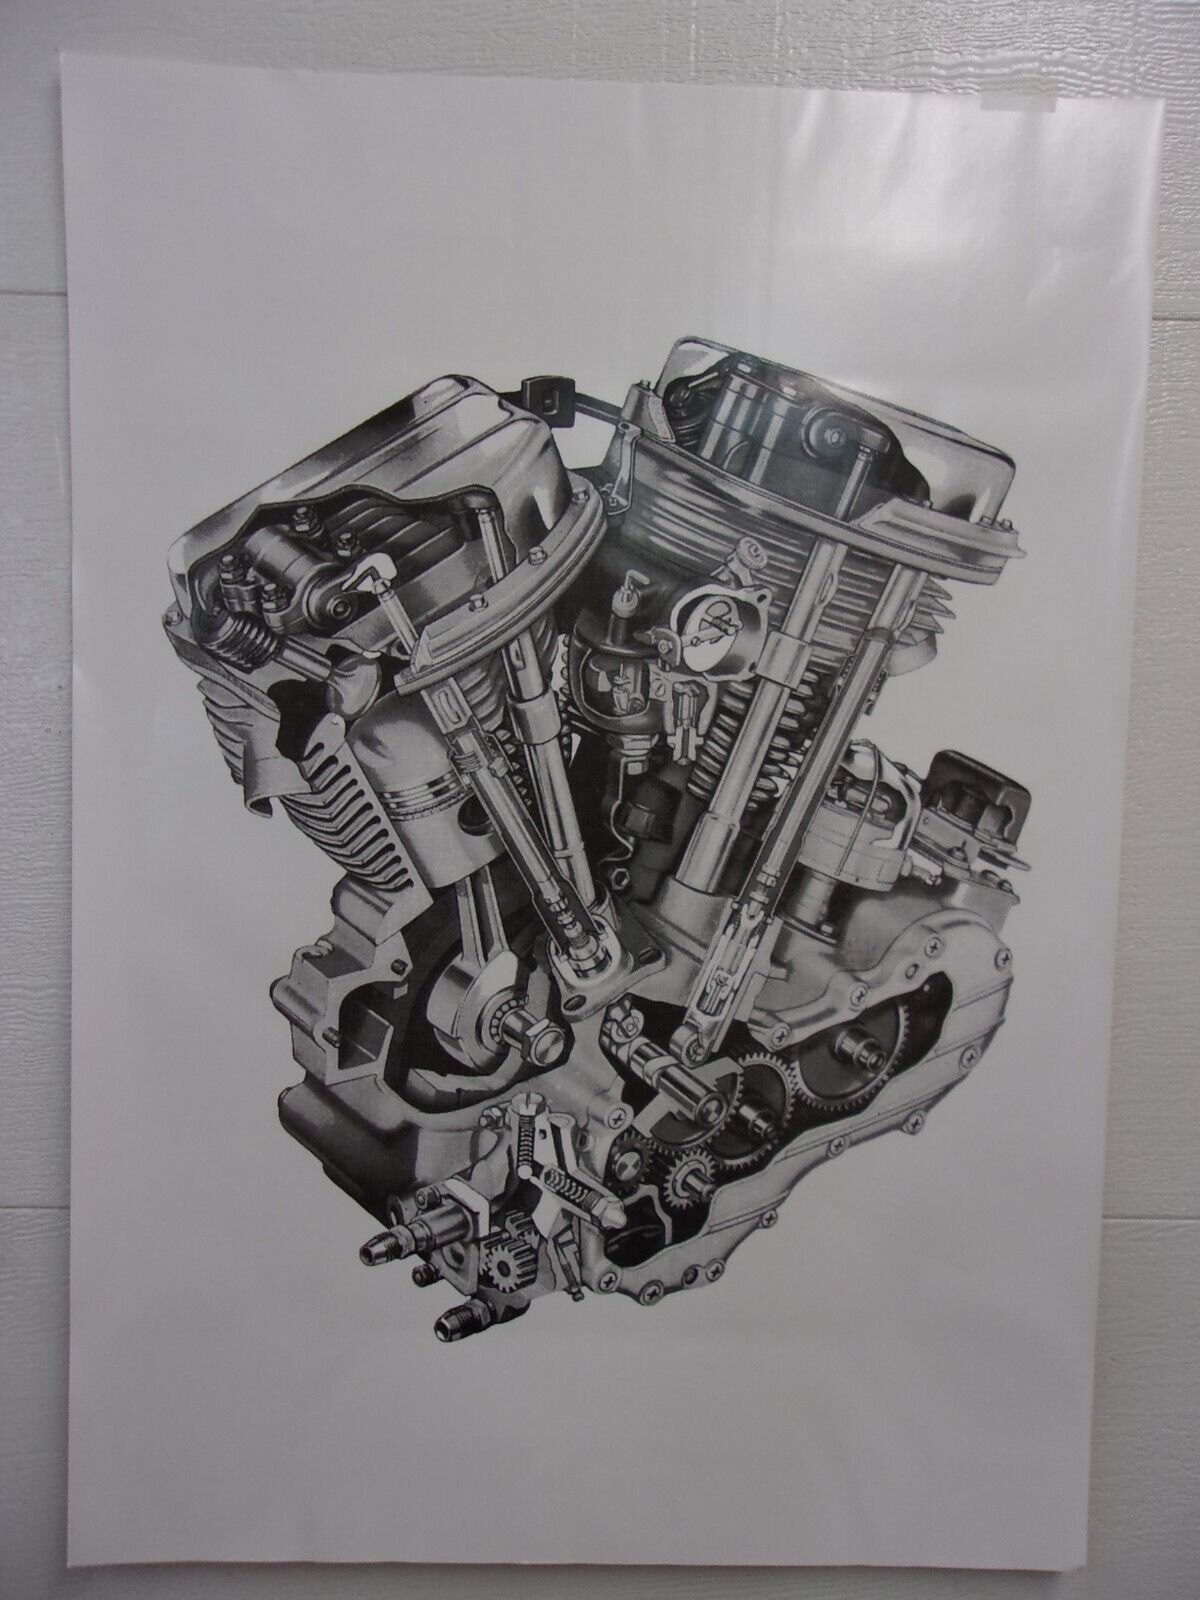 HARLEY-PANHEAD ENGINE EXPLODED VIEW FULL SIZE POSTER..WOW